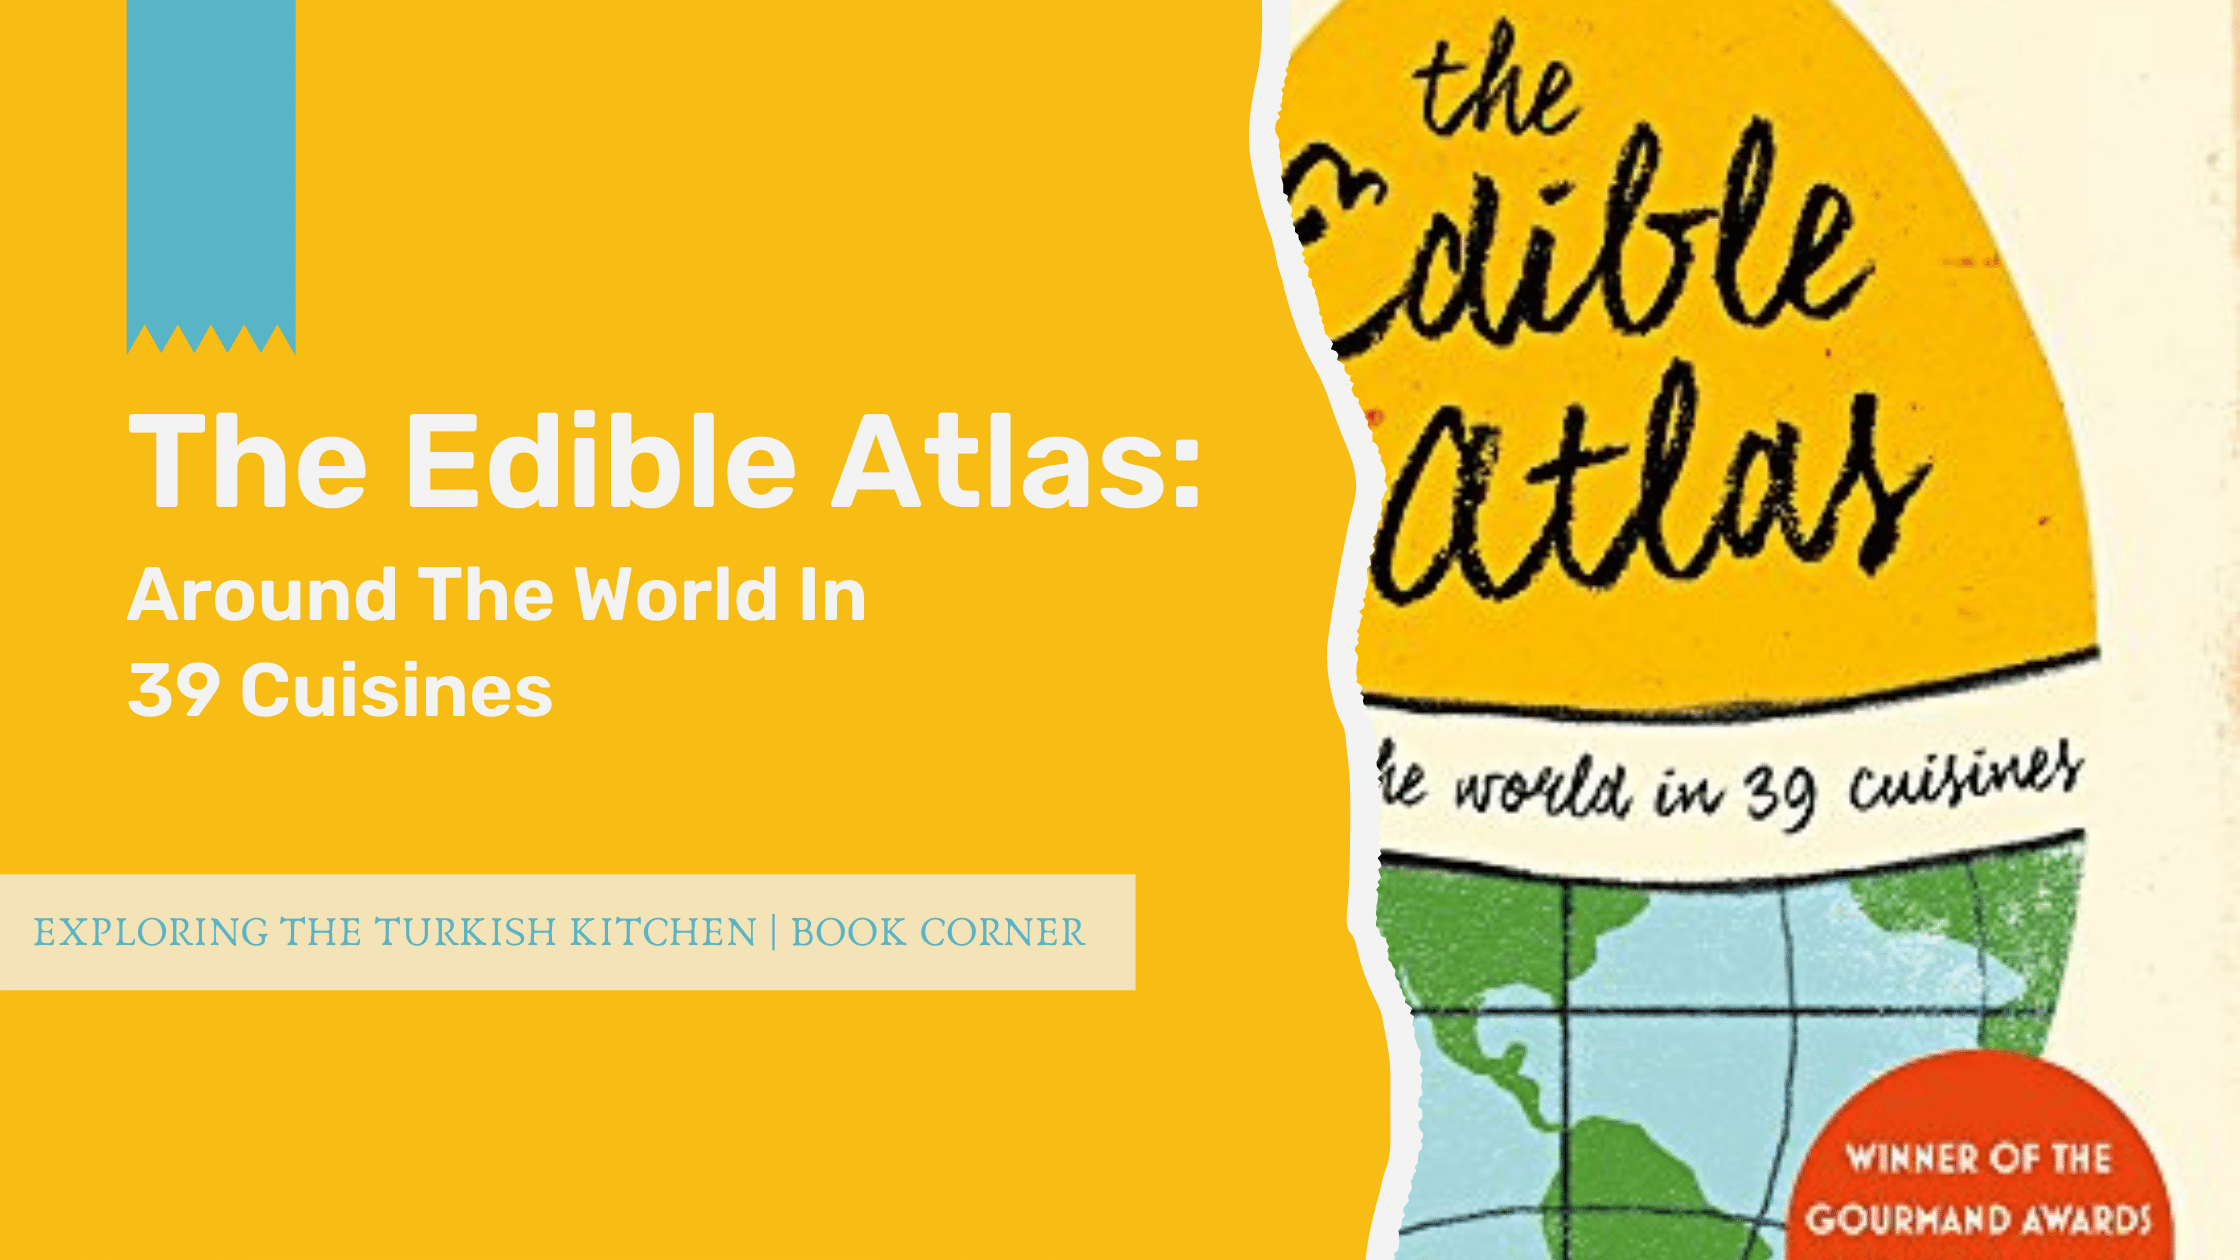 Cookbook Corner Blog Banner: Picture shows cover of an edible atlas book.